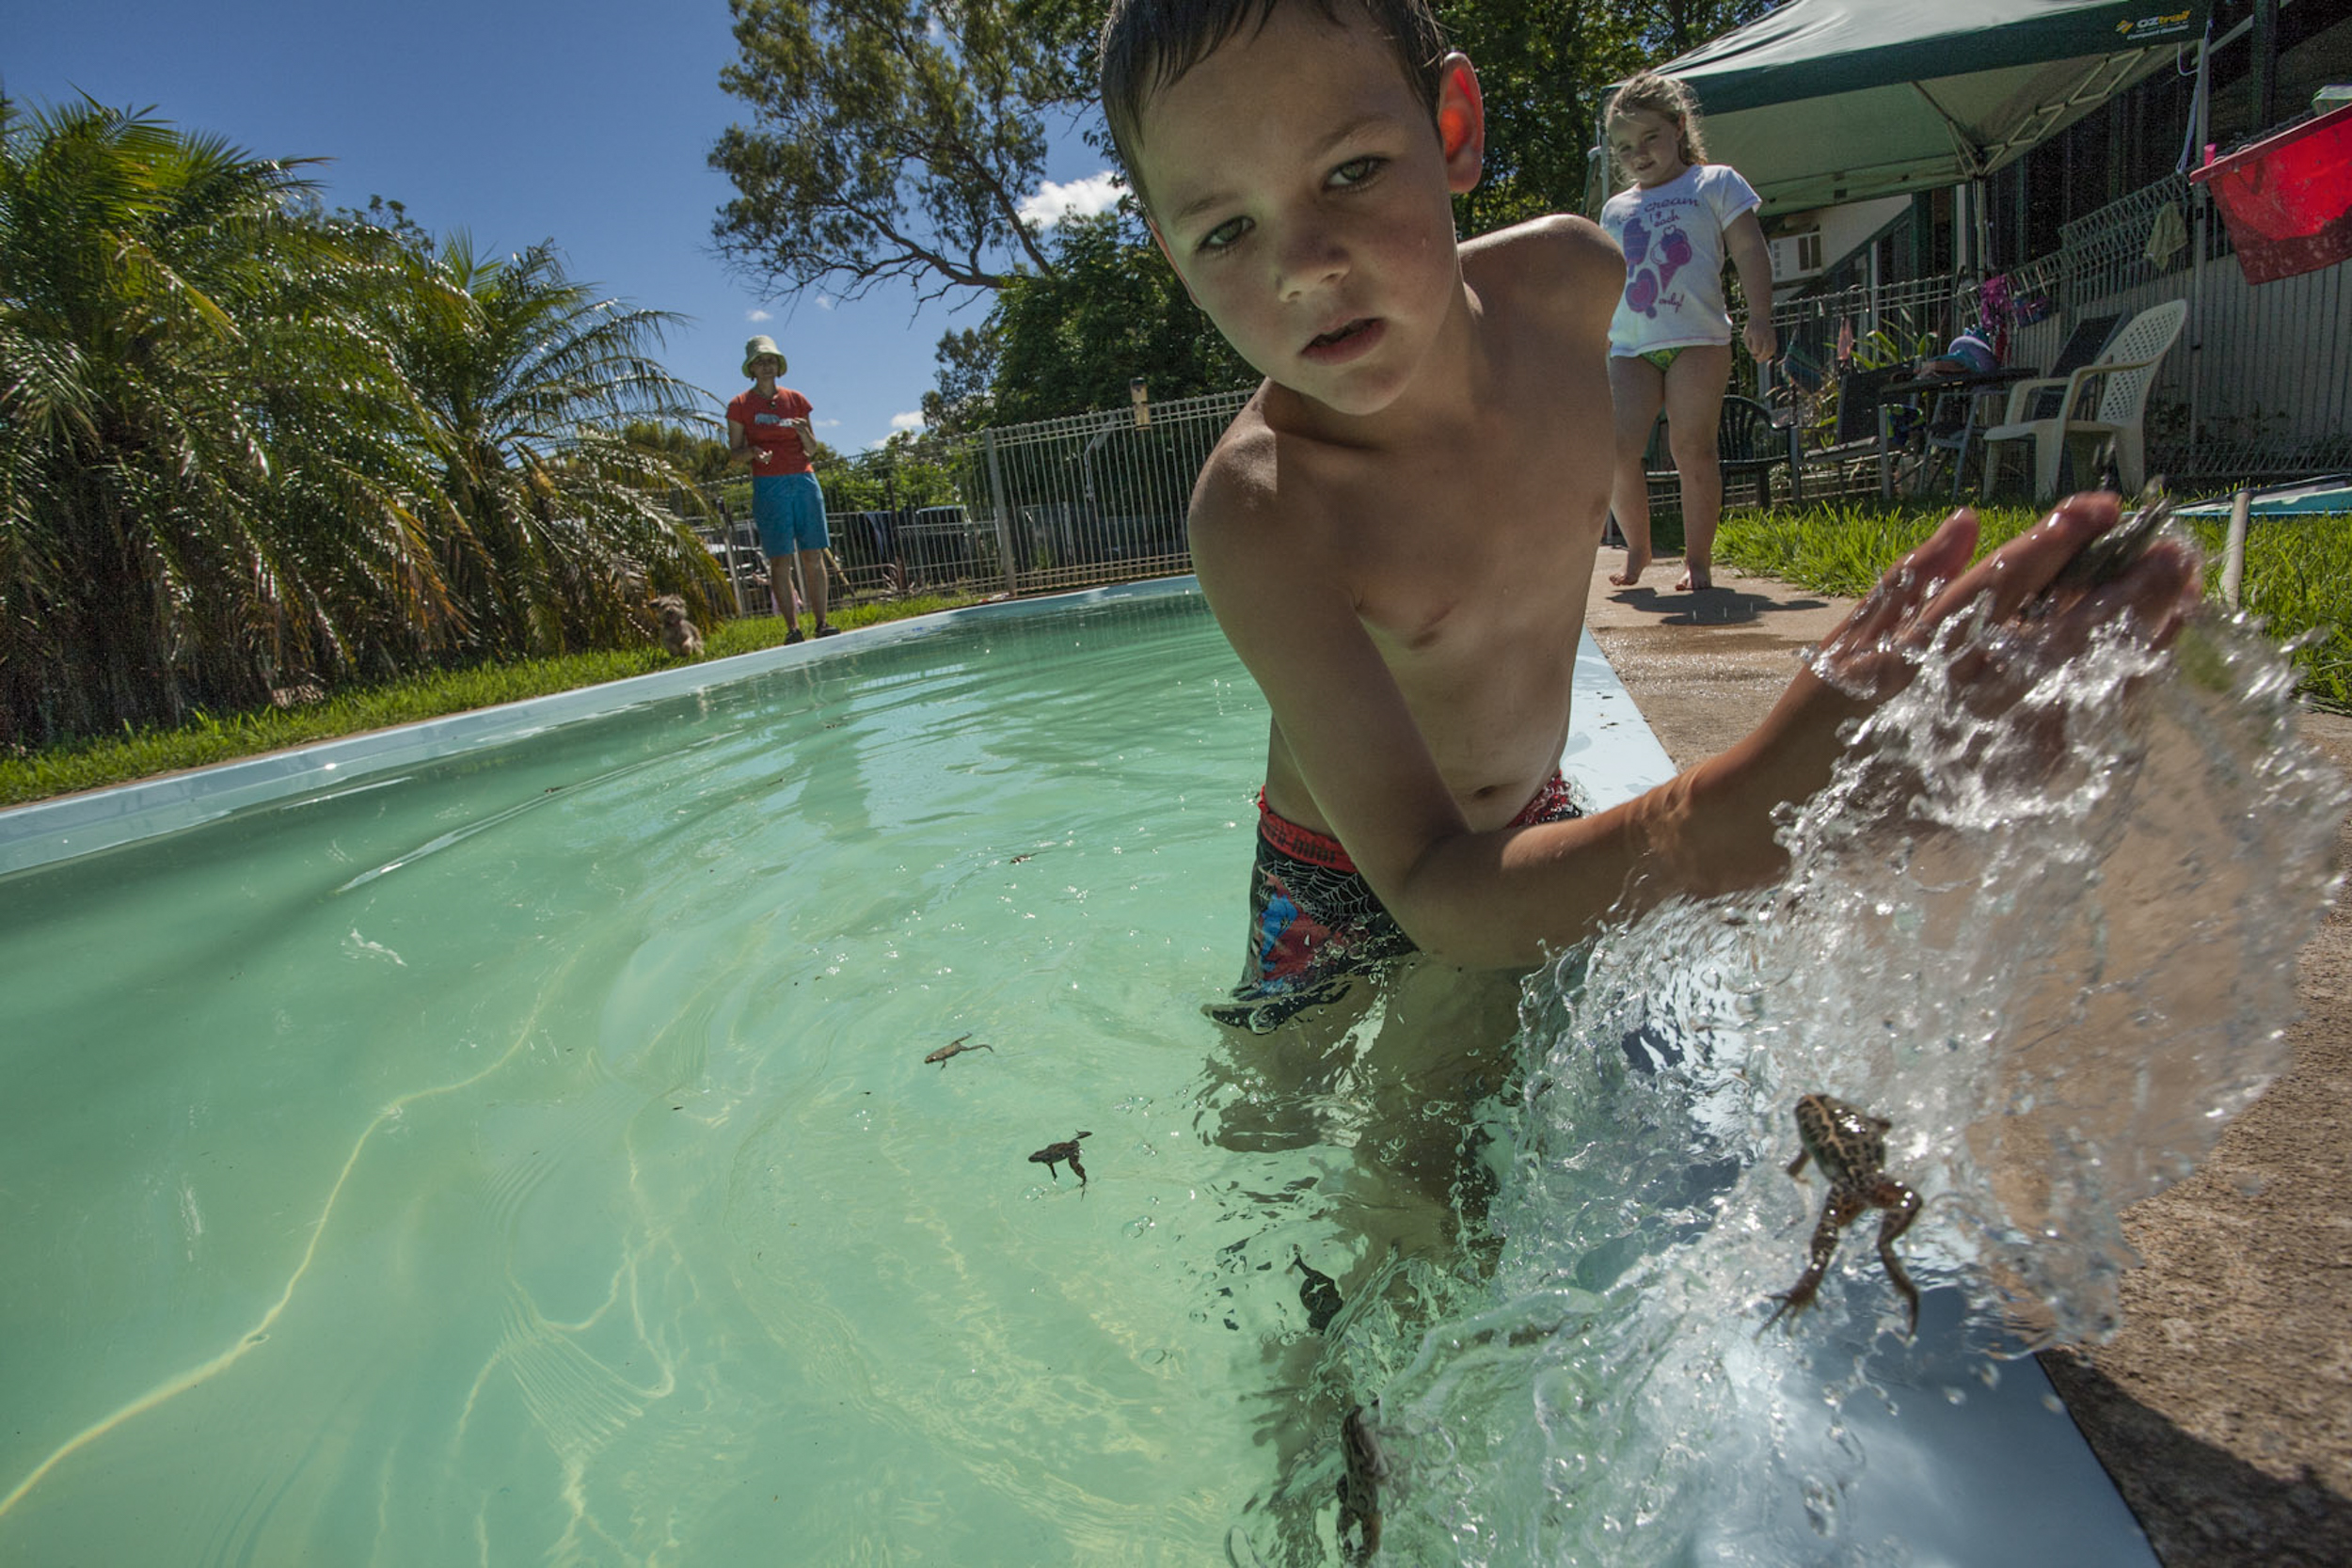  After heavy flooding in the marshes hundreds of frogs were washed into a local residents swimming pool. A group of kids worked hard to get the frogs out of the pool Macquarie Marshes, Australia 